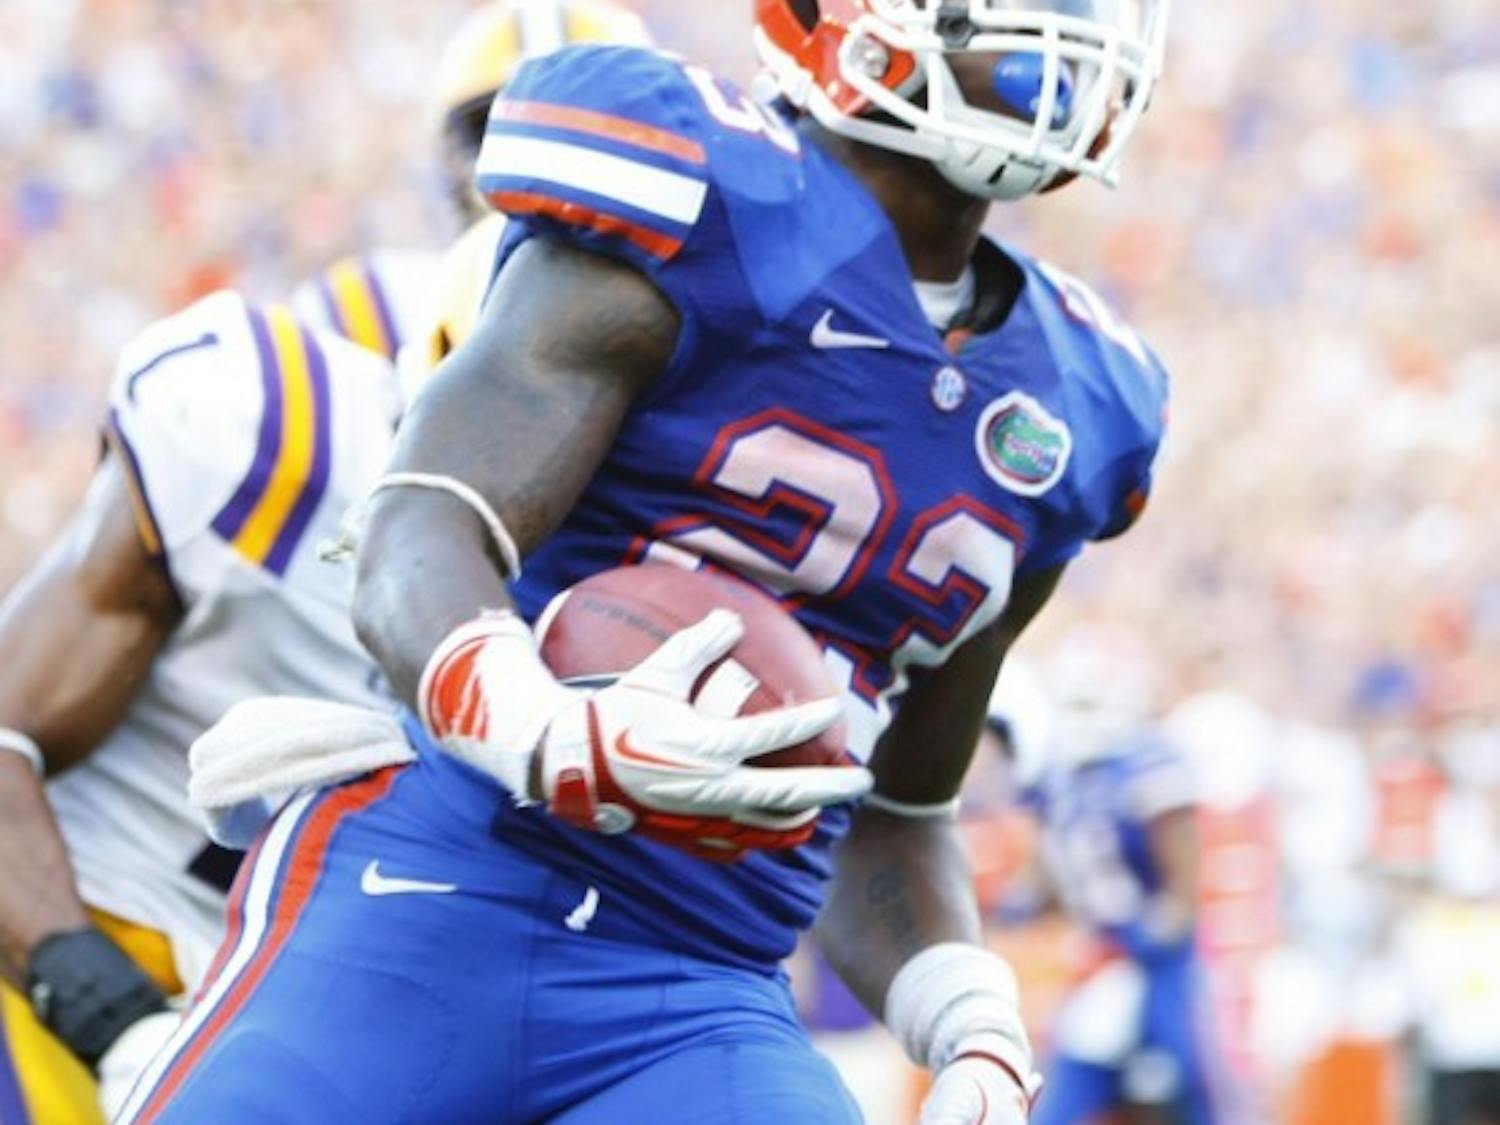 Senior running back Mike Gillislee sprints into the end zone untouched during UF’s 14-6 victory against LSU on Saturday at Ben Hill Griffin Stadium. Gillislee totaled 146 rushing yards and two touchdowns on 34 carries against the Tigers.